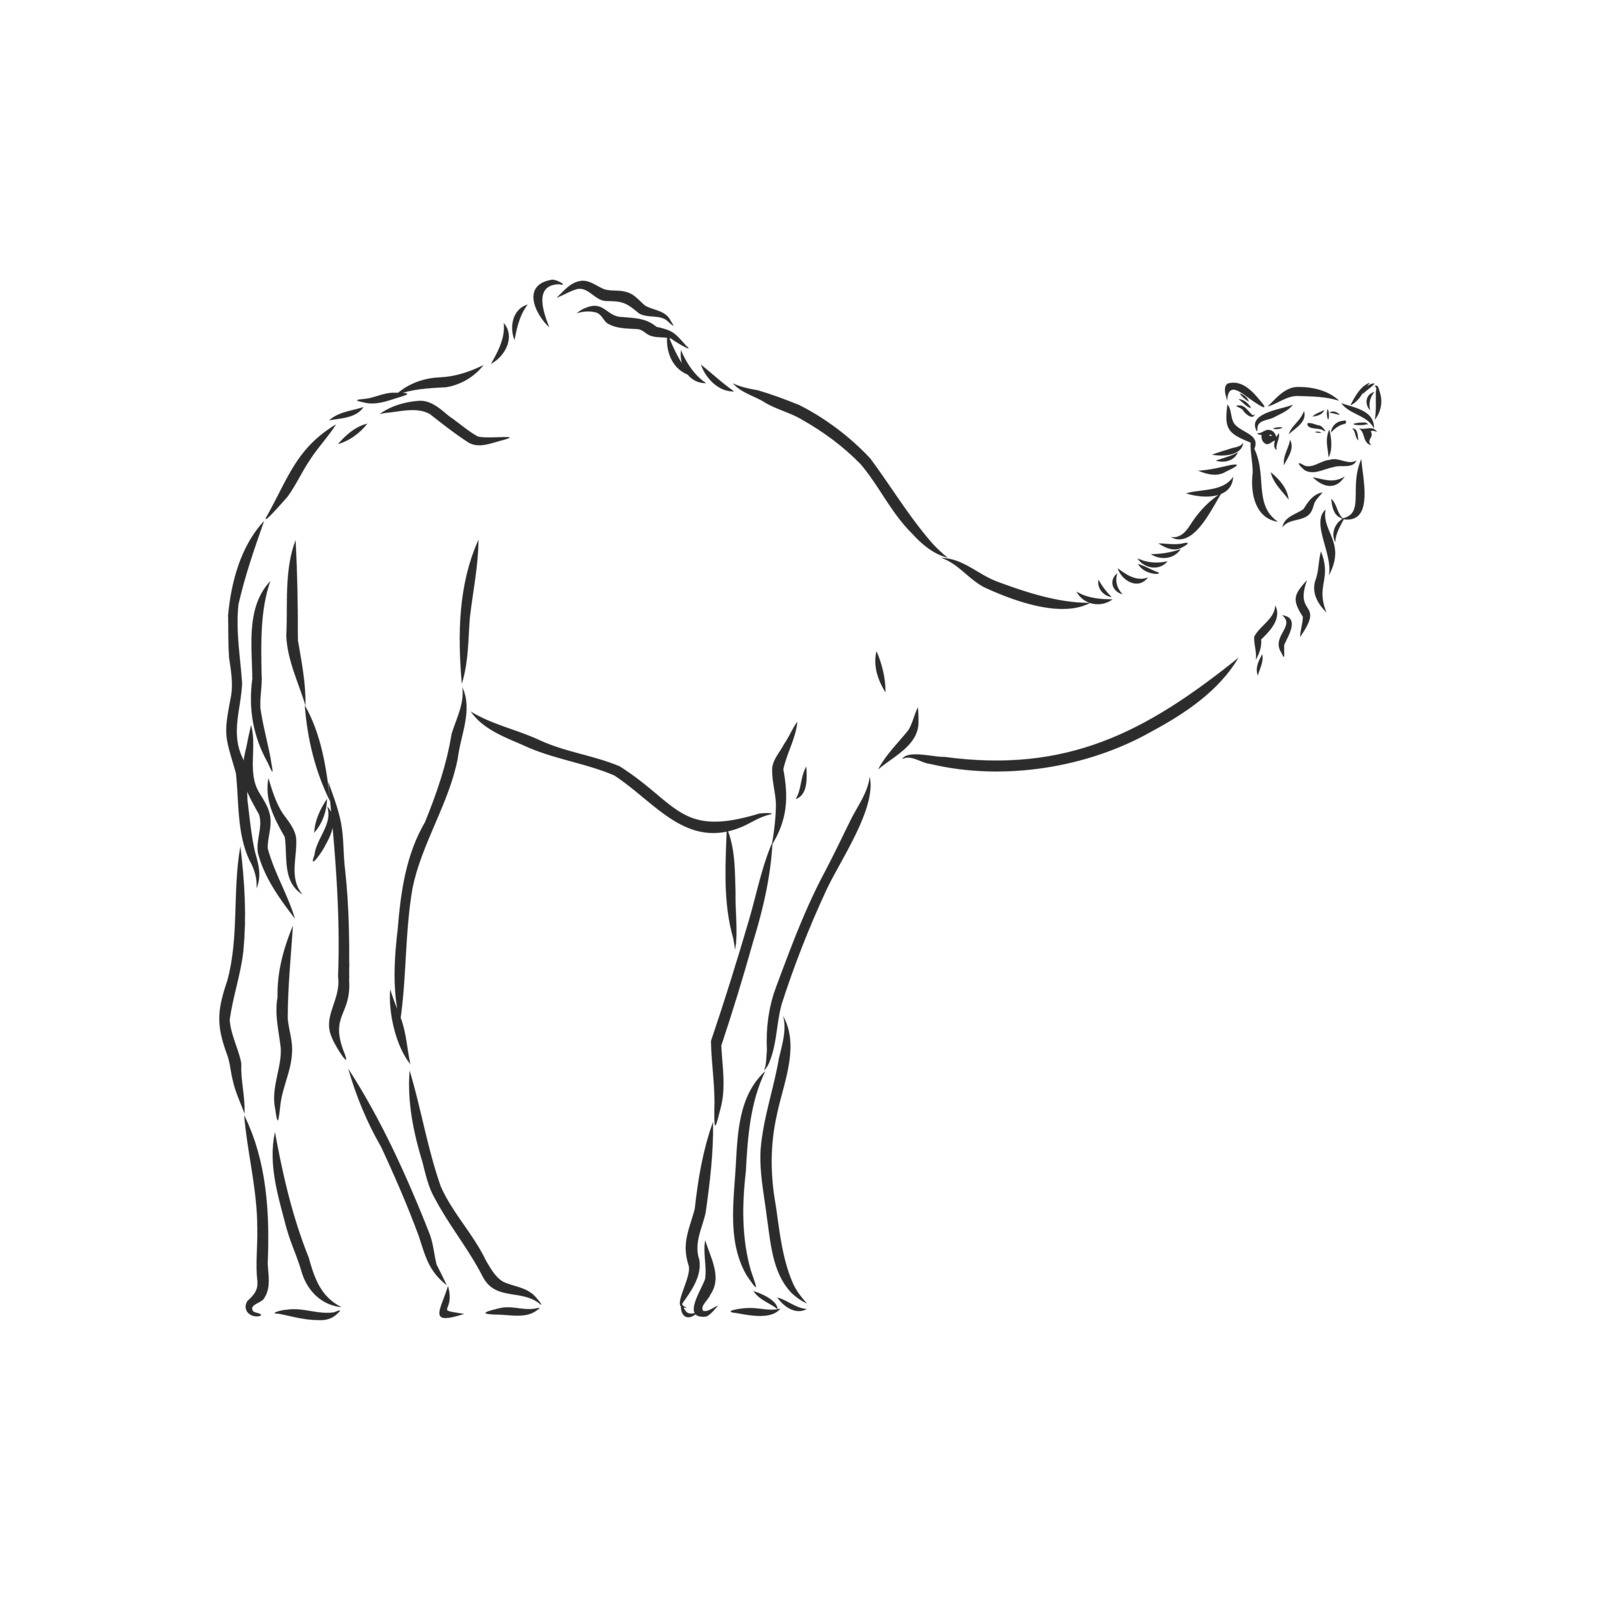 Camel. Hand drawn vector illustration. Can be used separately from your design.